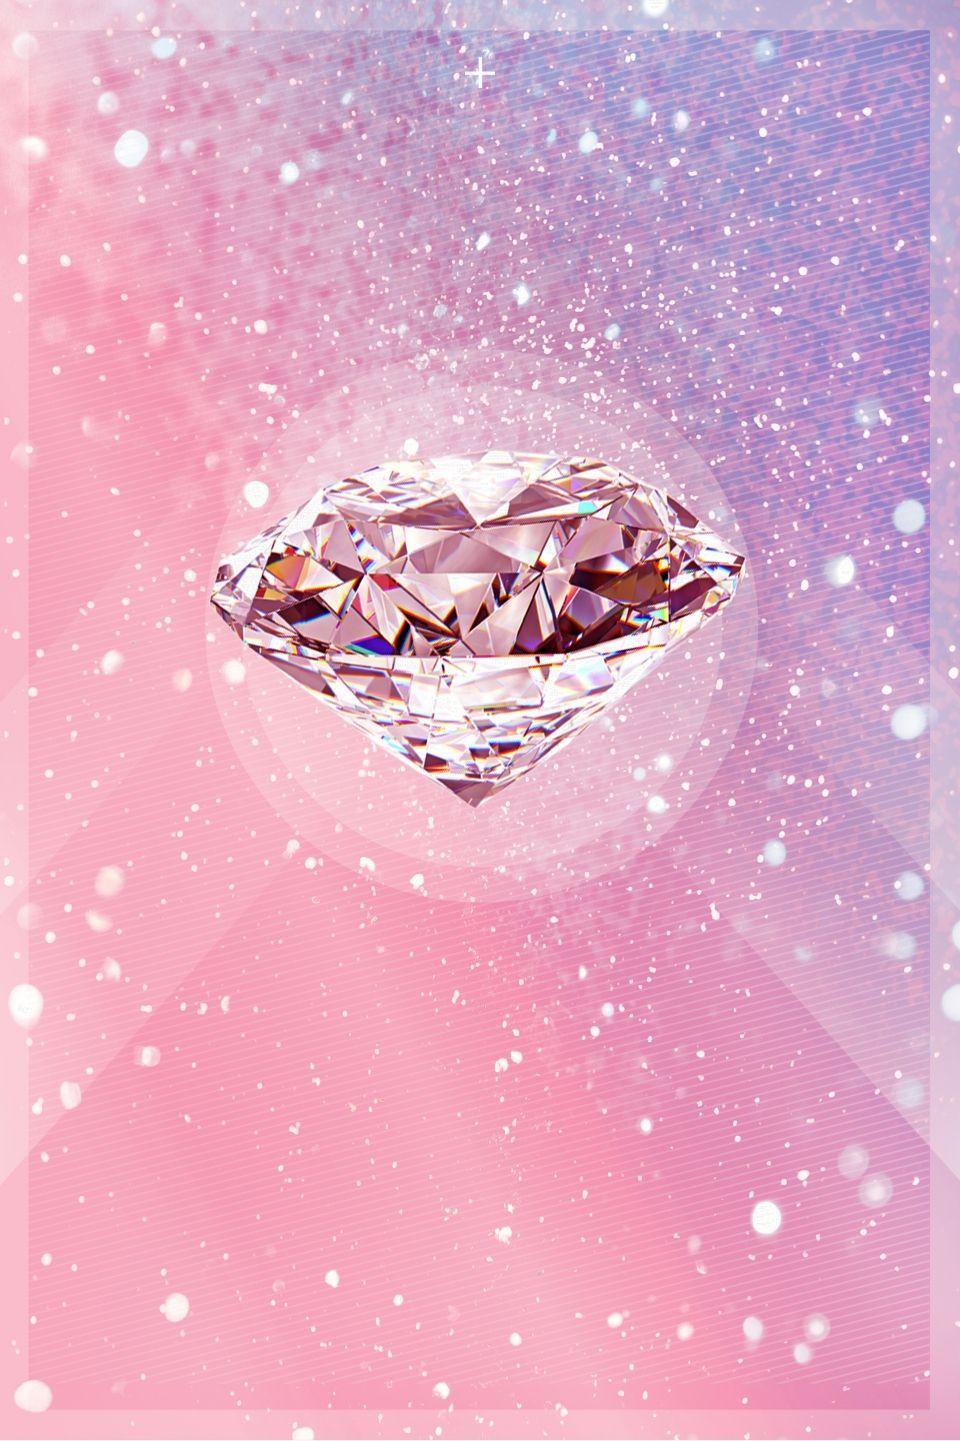 Pink Diamond Background Images Browse 308829 Stock Photos  Vectors Free  Download with Trial  Shutterstock